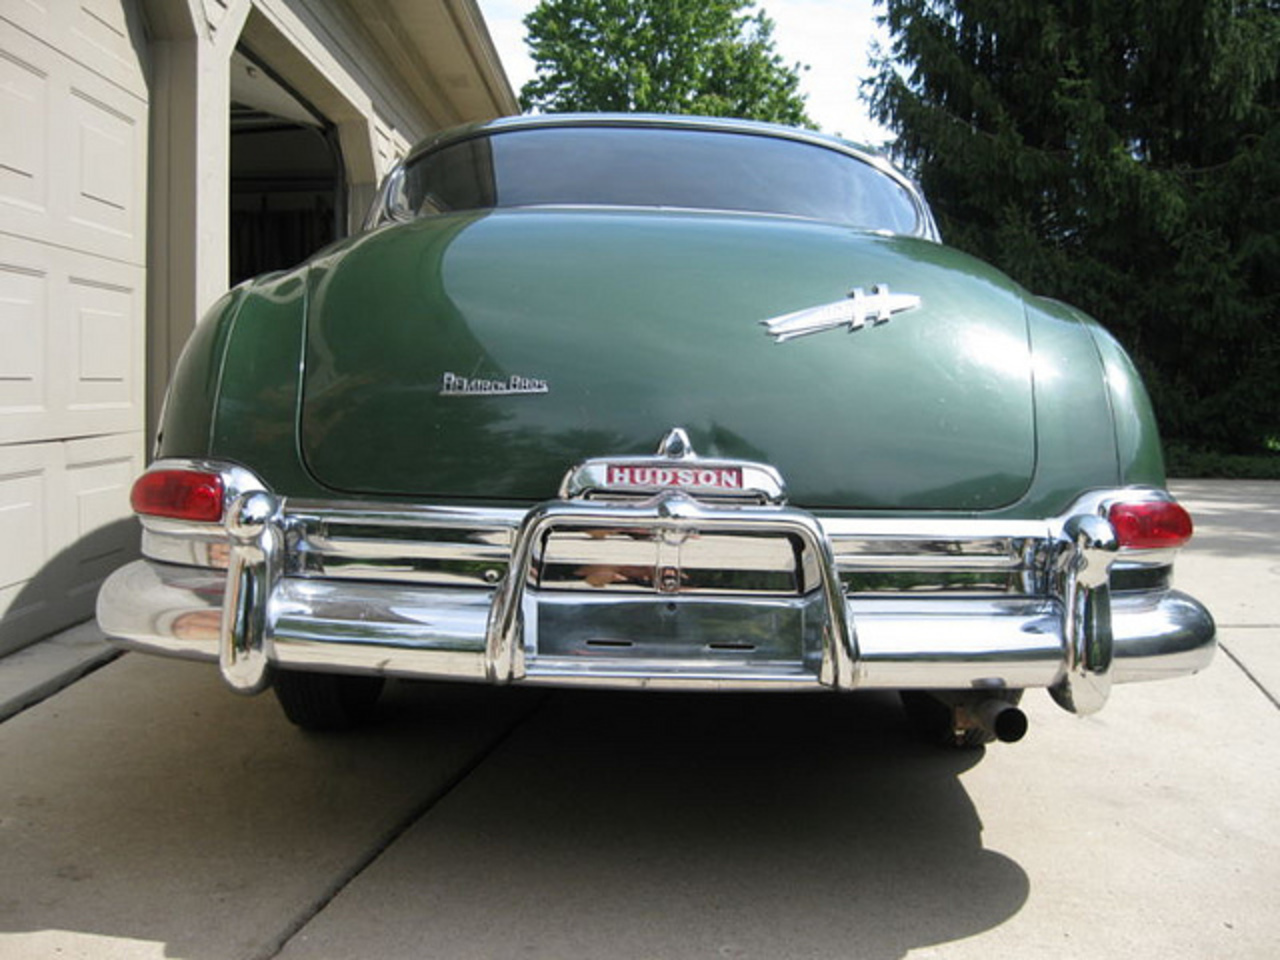 1953 Hudson Hornet Club Coupe. | Flickr - Photo Sharing!